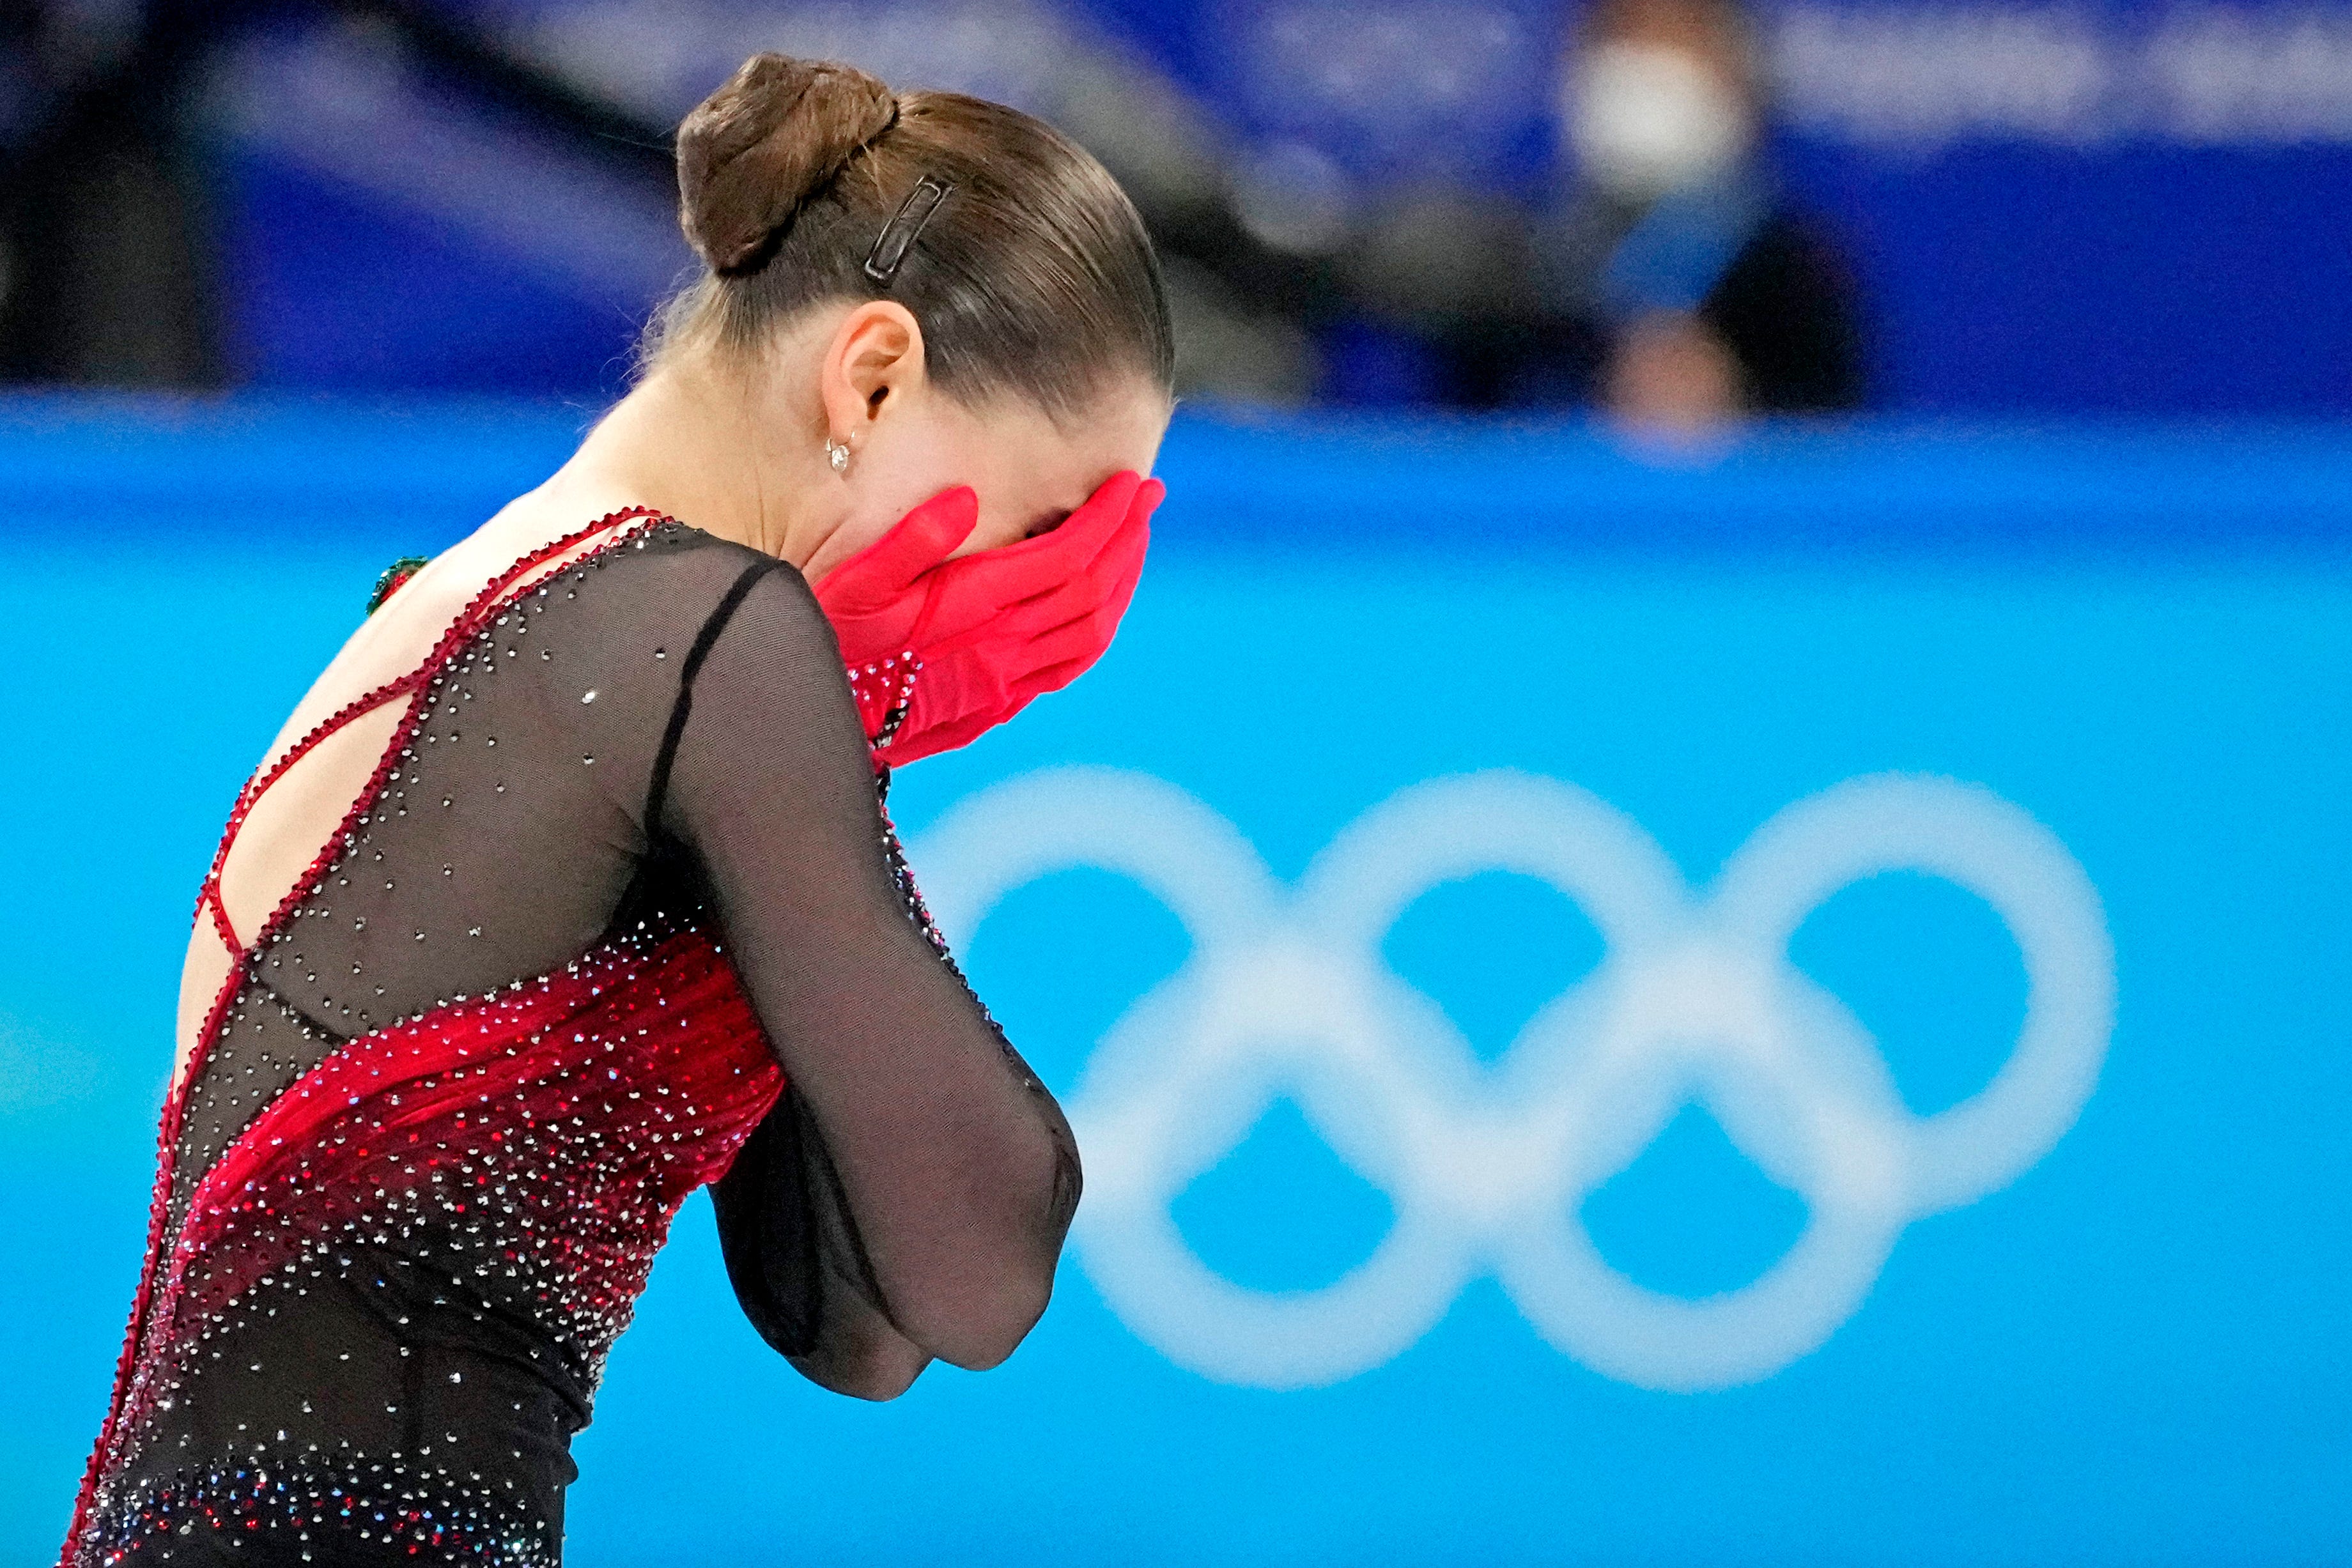 Hearing being held to decide if US figure skaters get their medals  before closing ceremony thumbnail